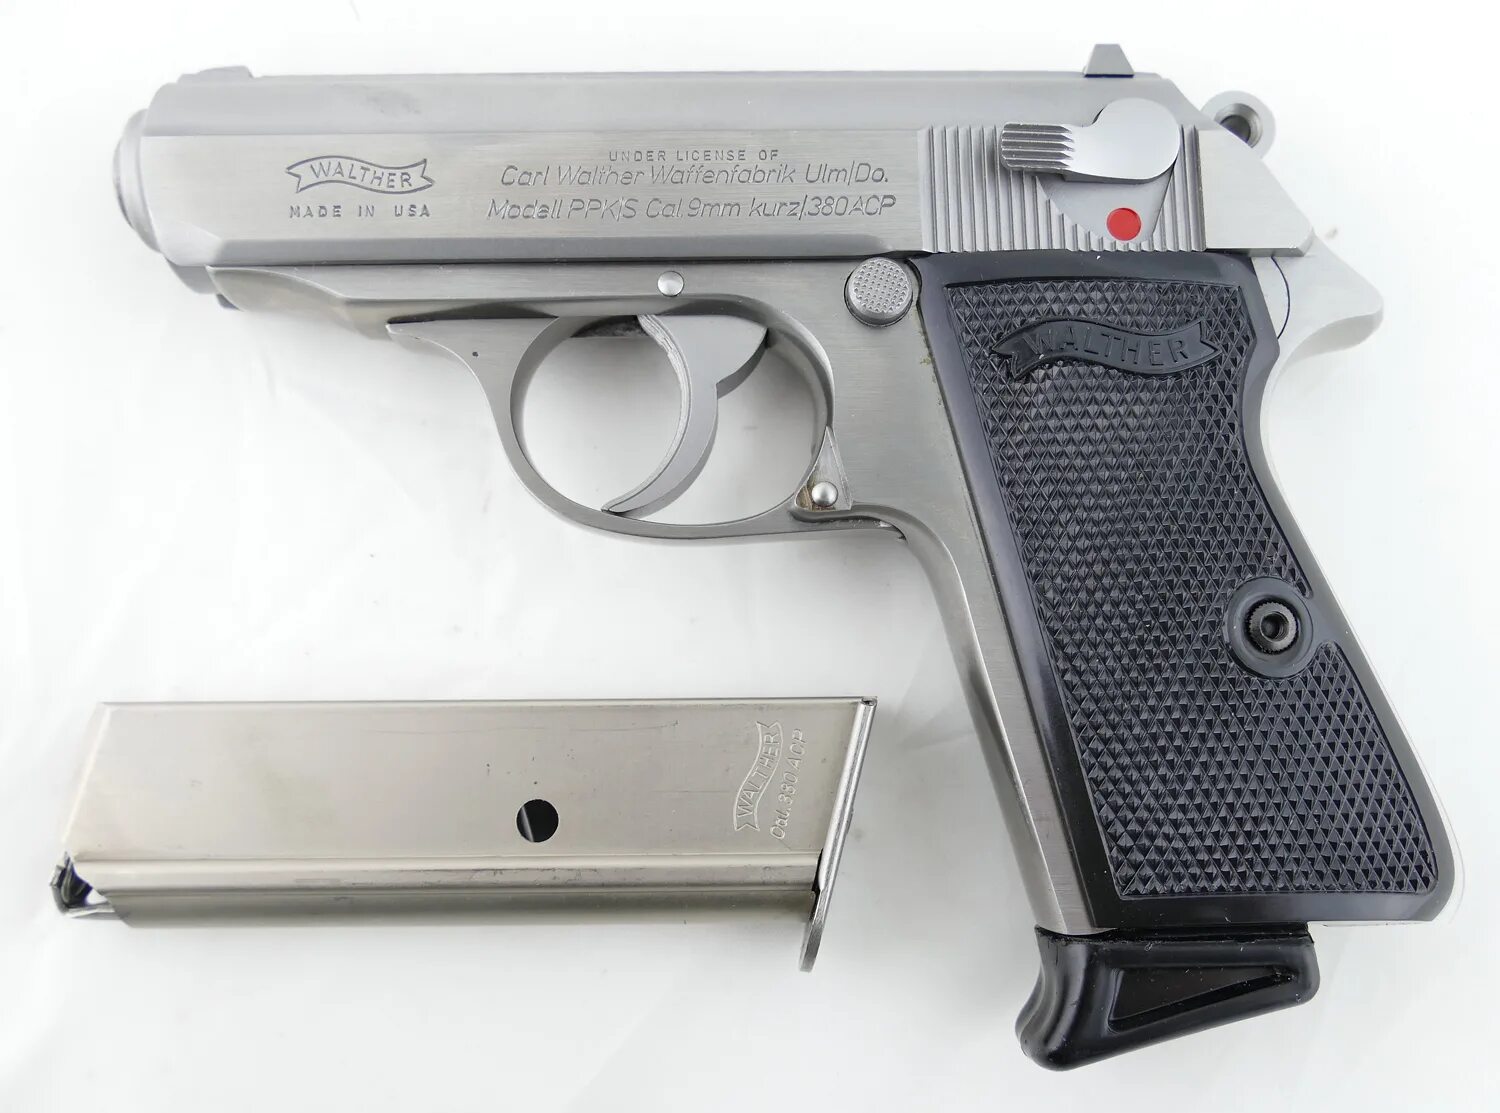 Walther ppk s. Walther PPK/S 380.